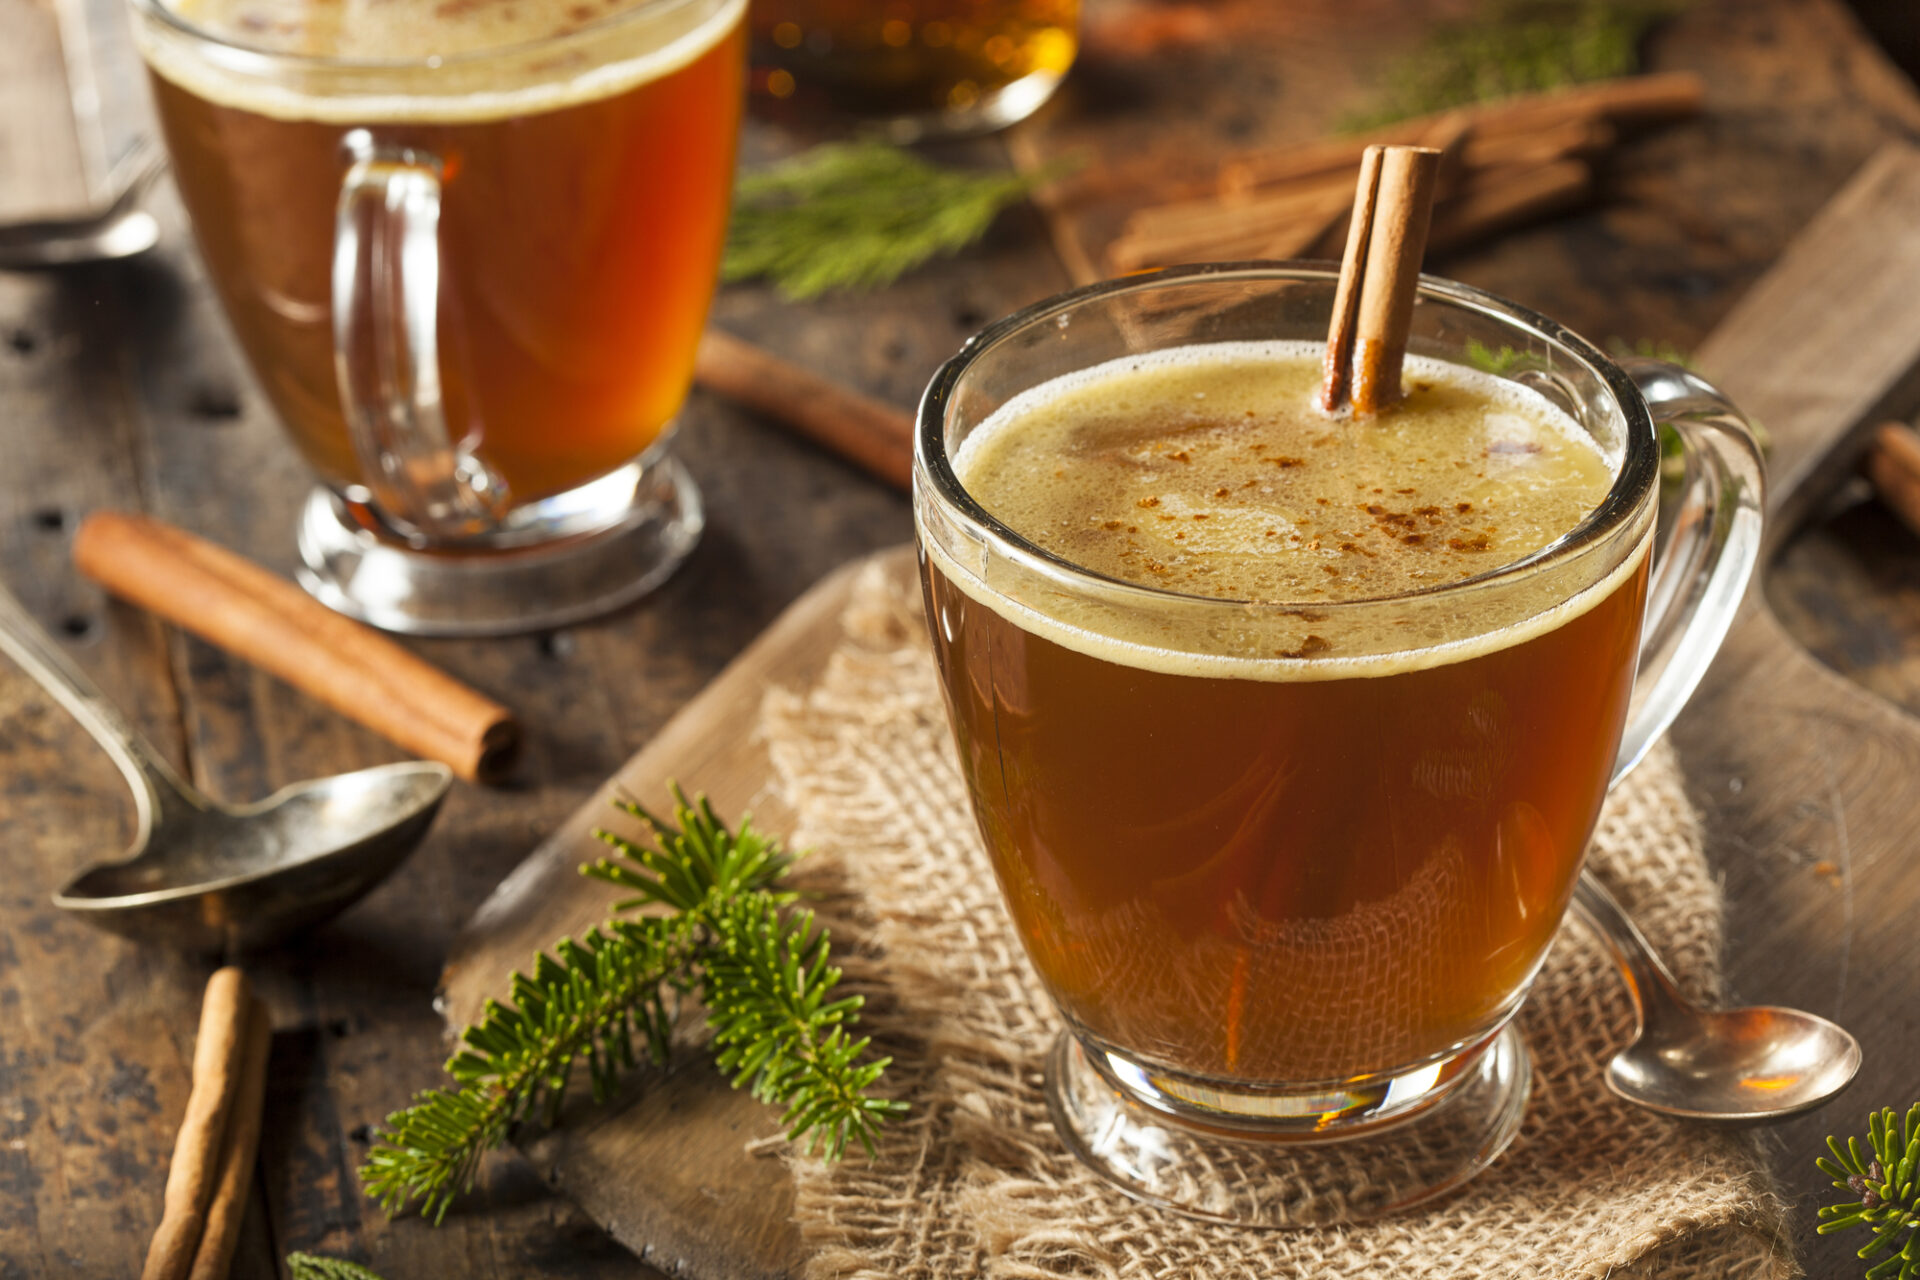 Hot buttered rum on a counter with wintry decorations.